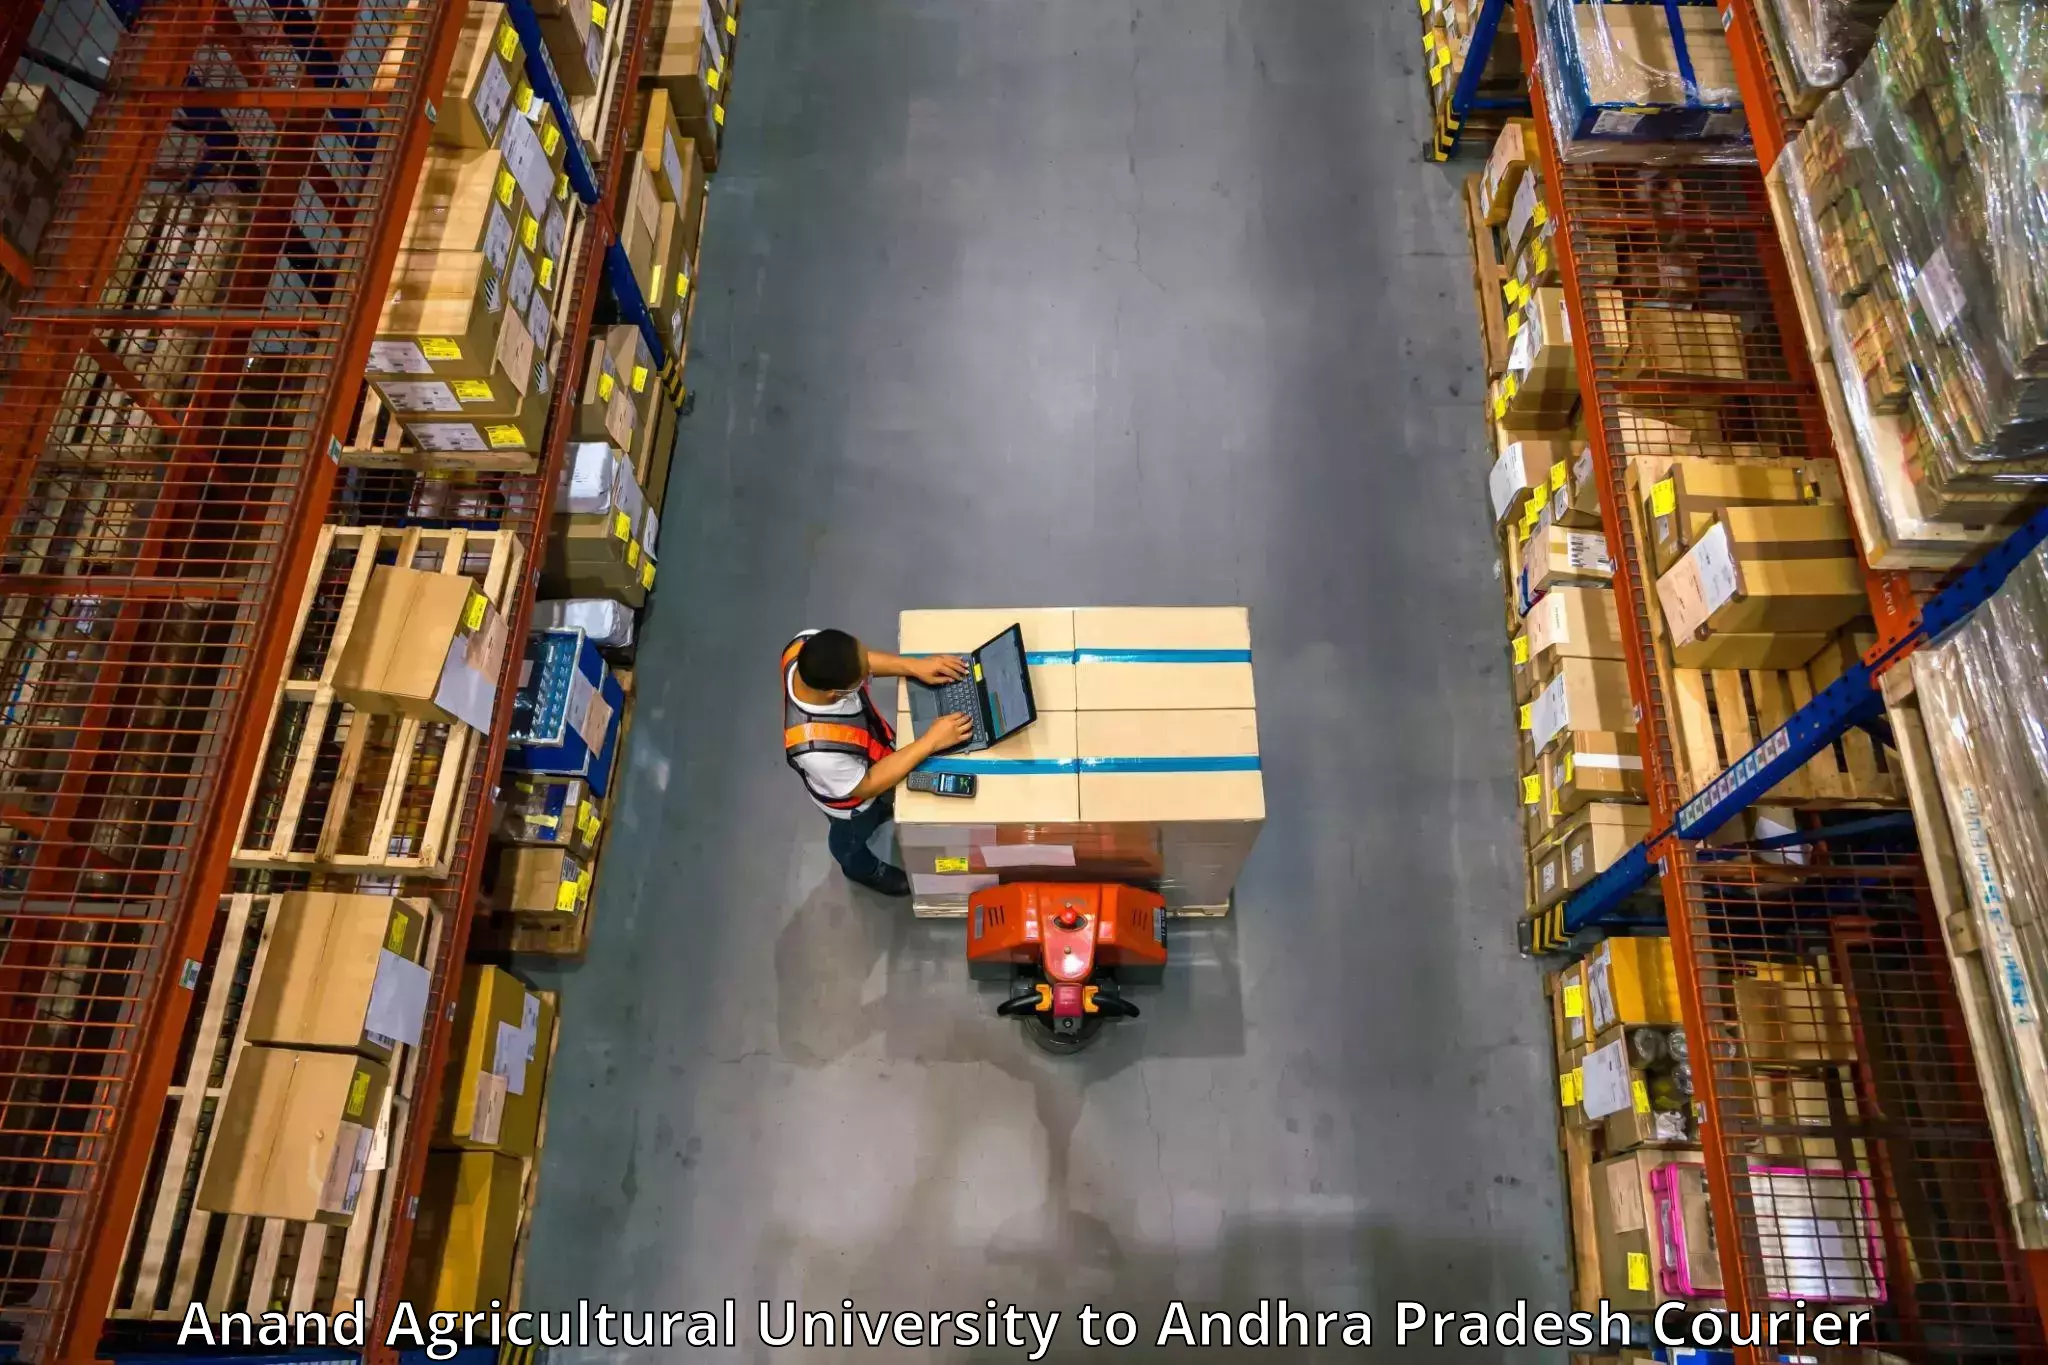 Trusted furniture transport Anand Agricultural University to Mantada